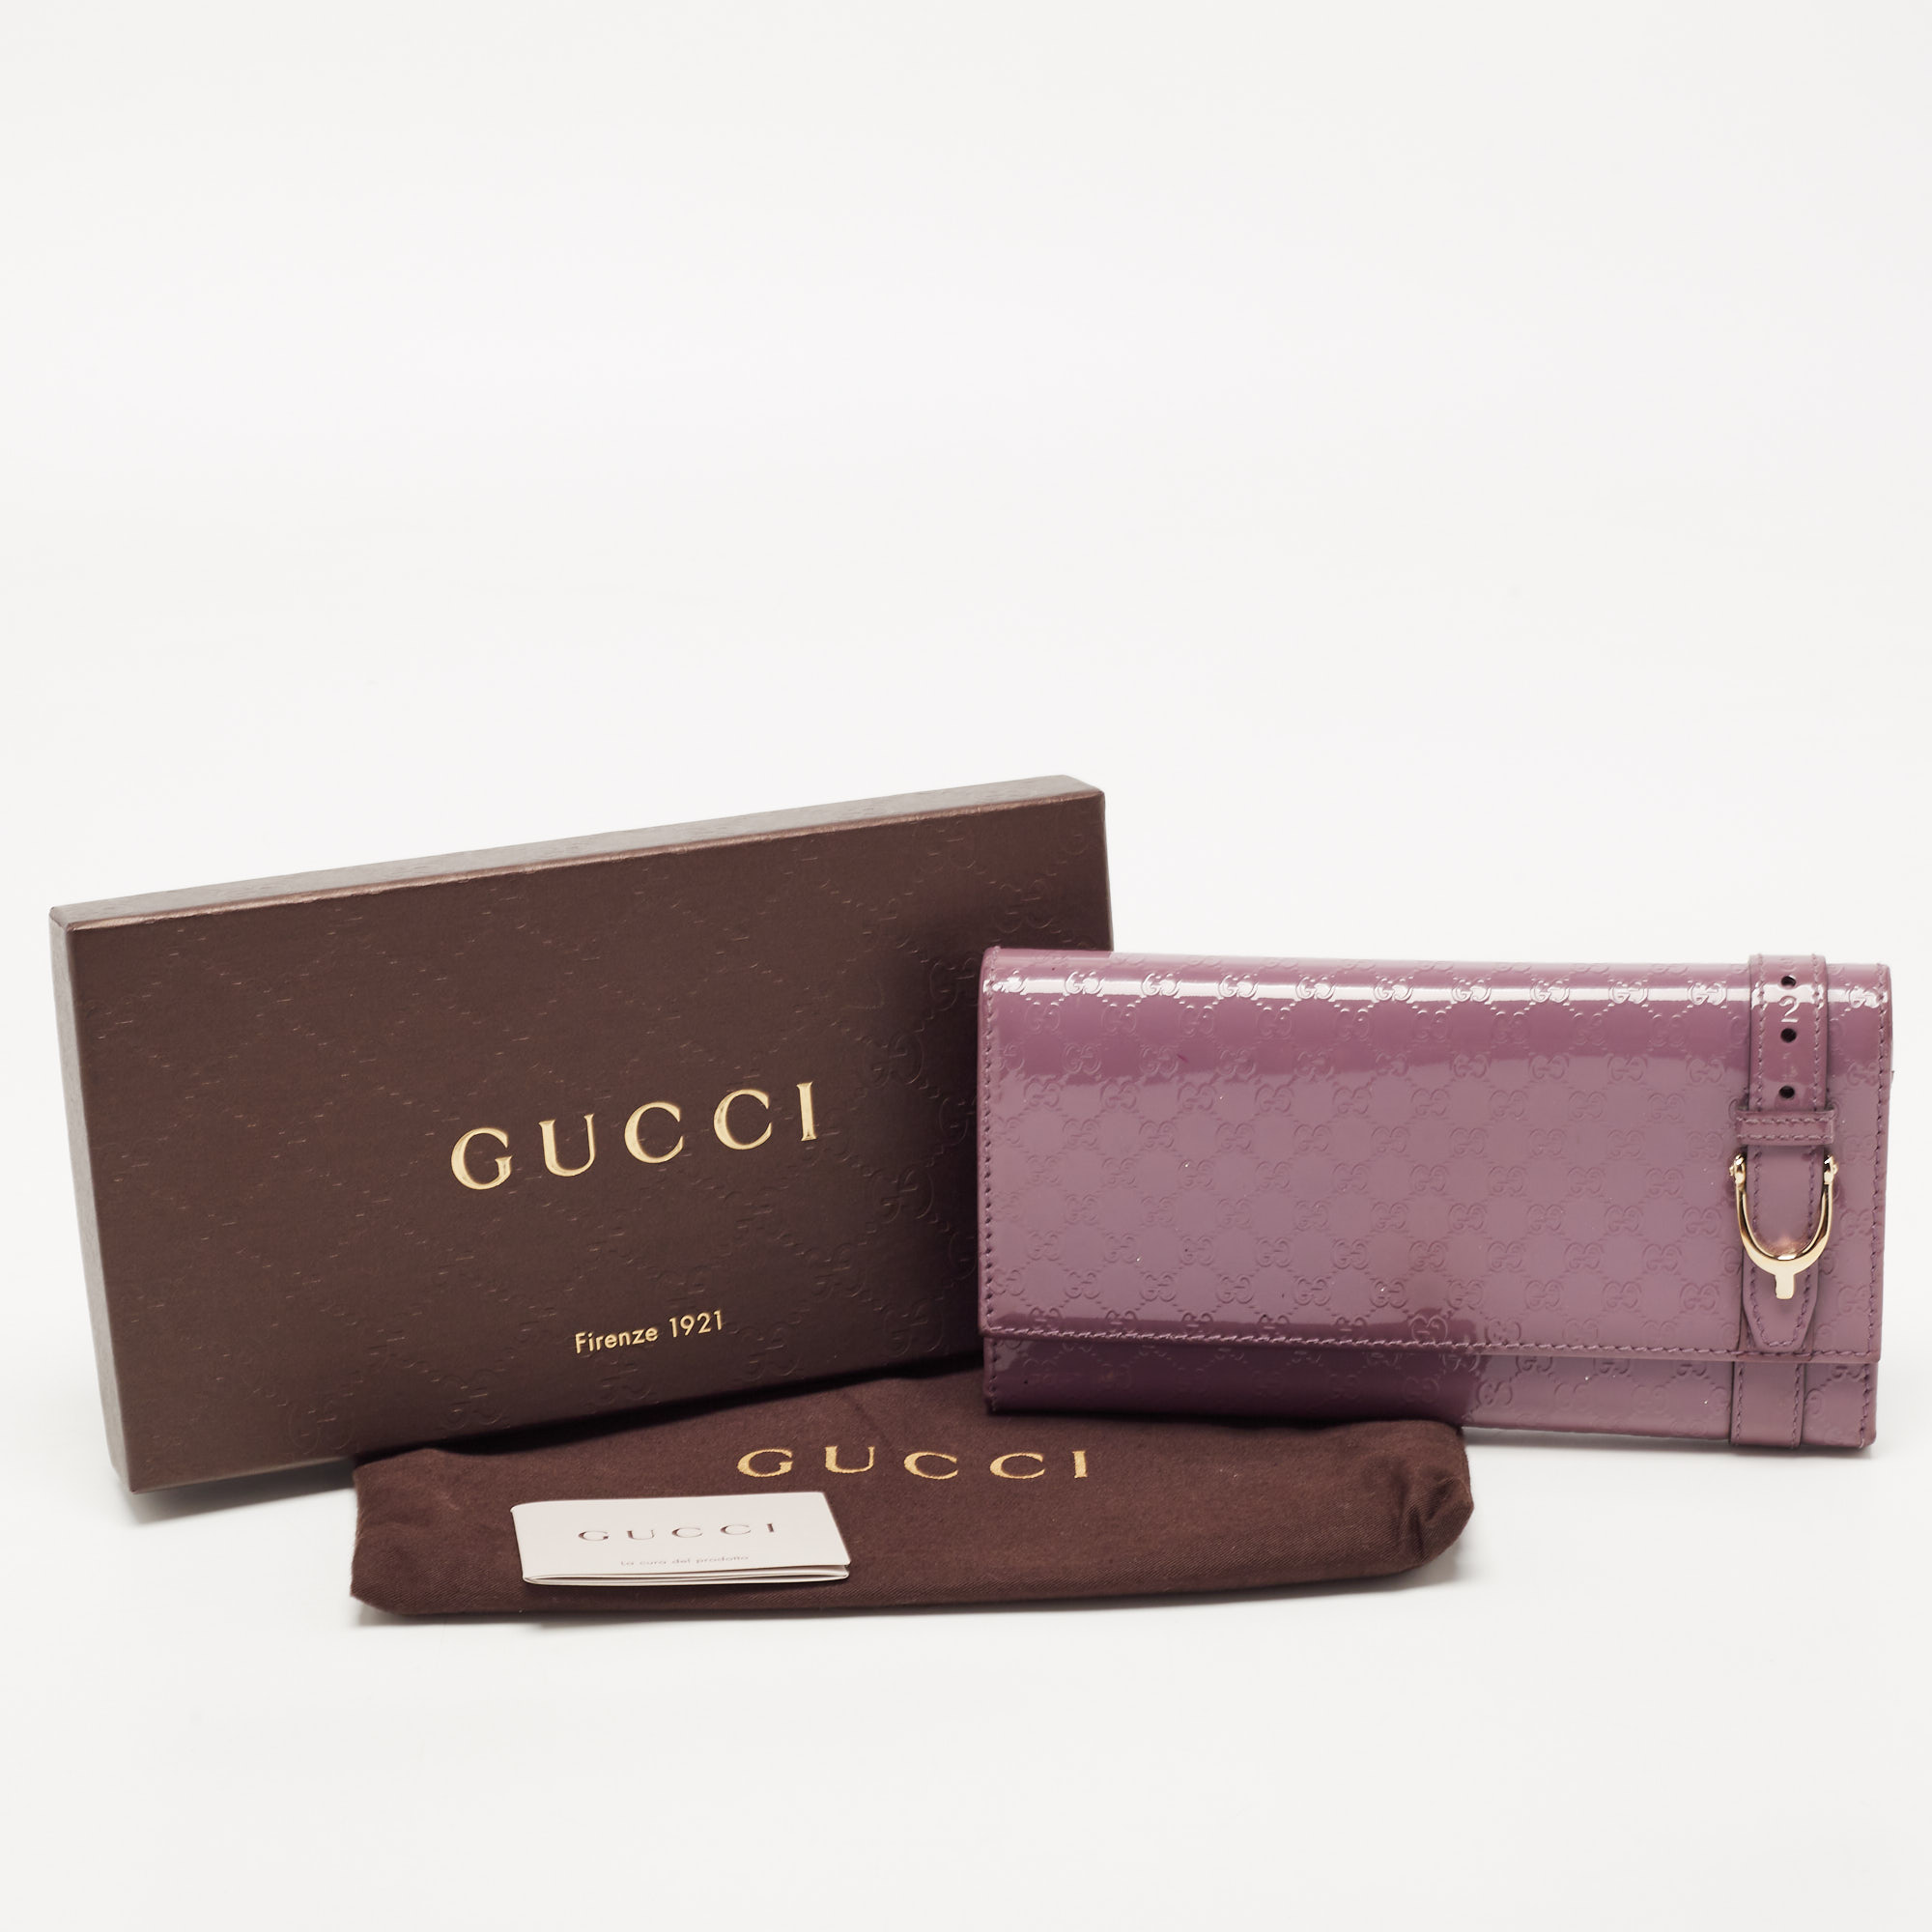 Gucci Lilac Microguccissima Patent Leather Nice Long Wallet